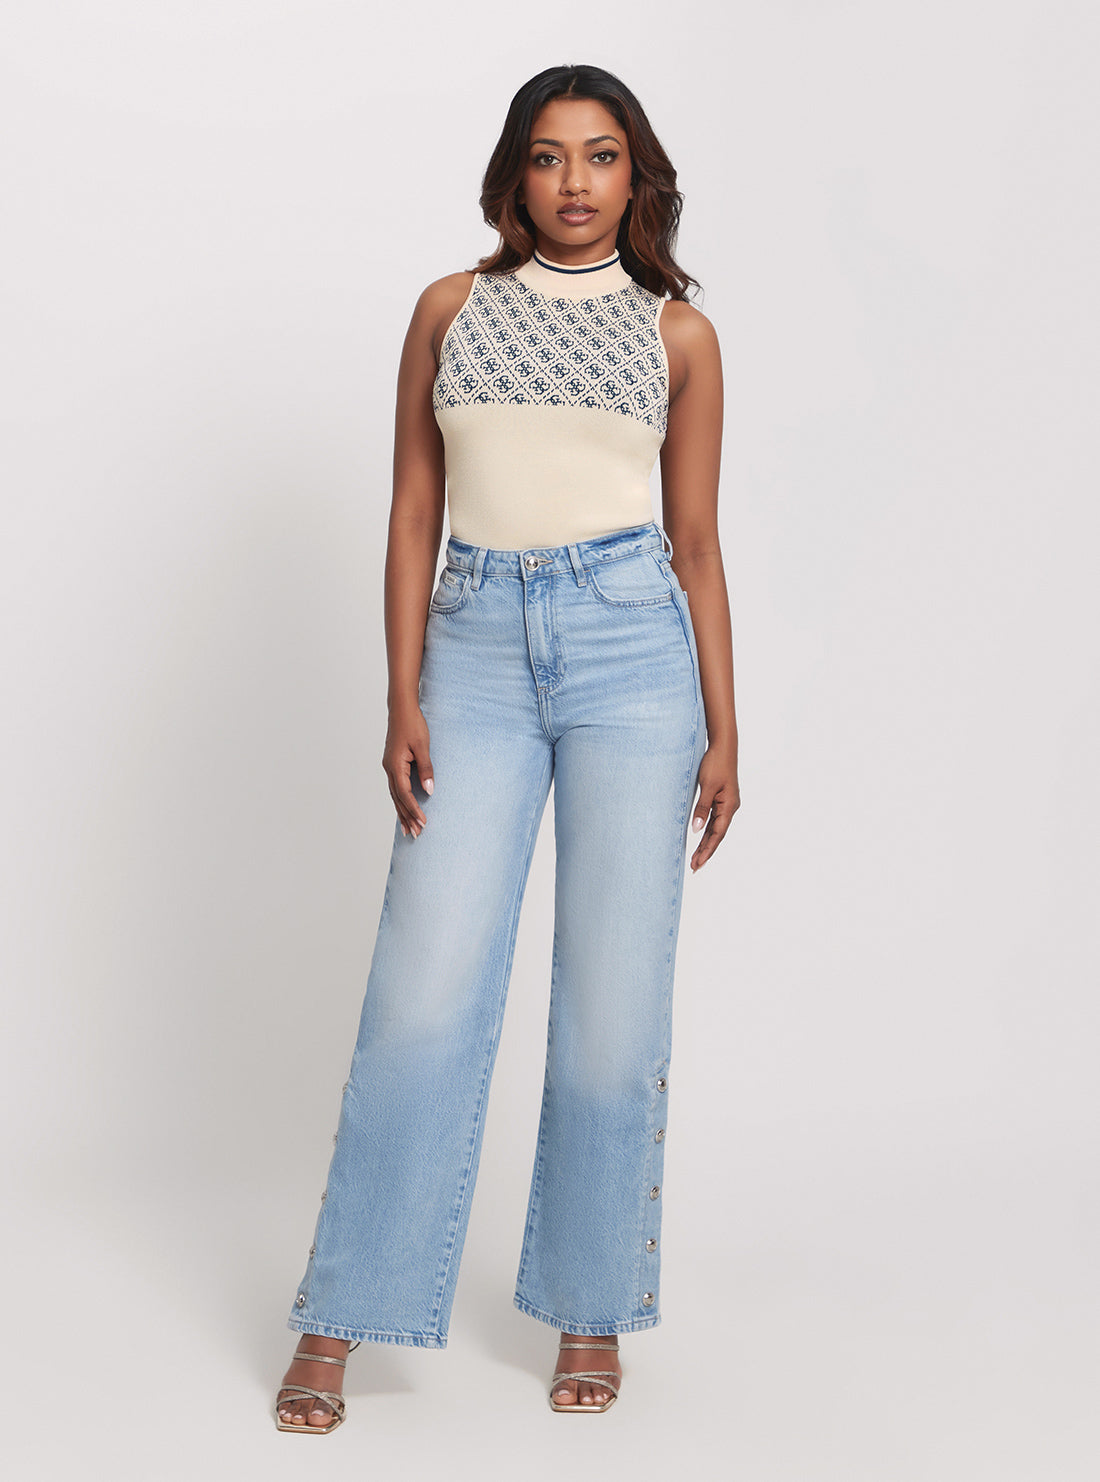 GUESS High-Rise Paz Wide Leg Denim Jeans in Light Wash full view